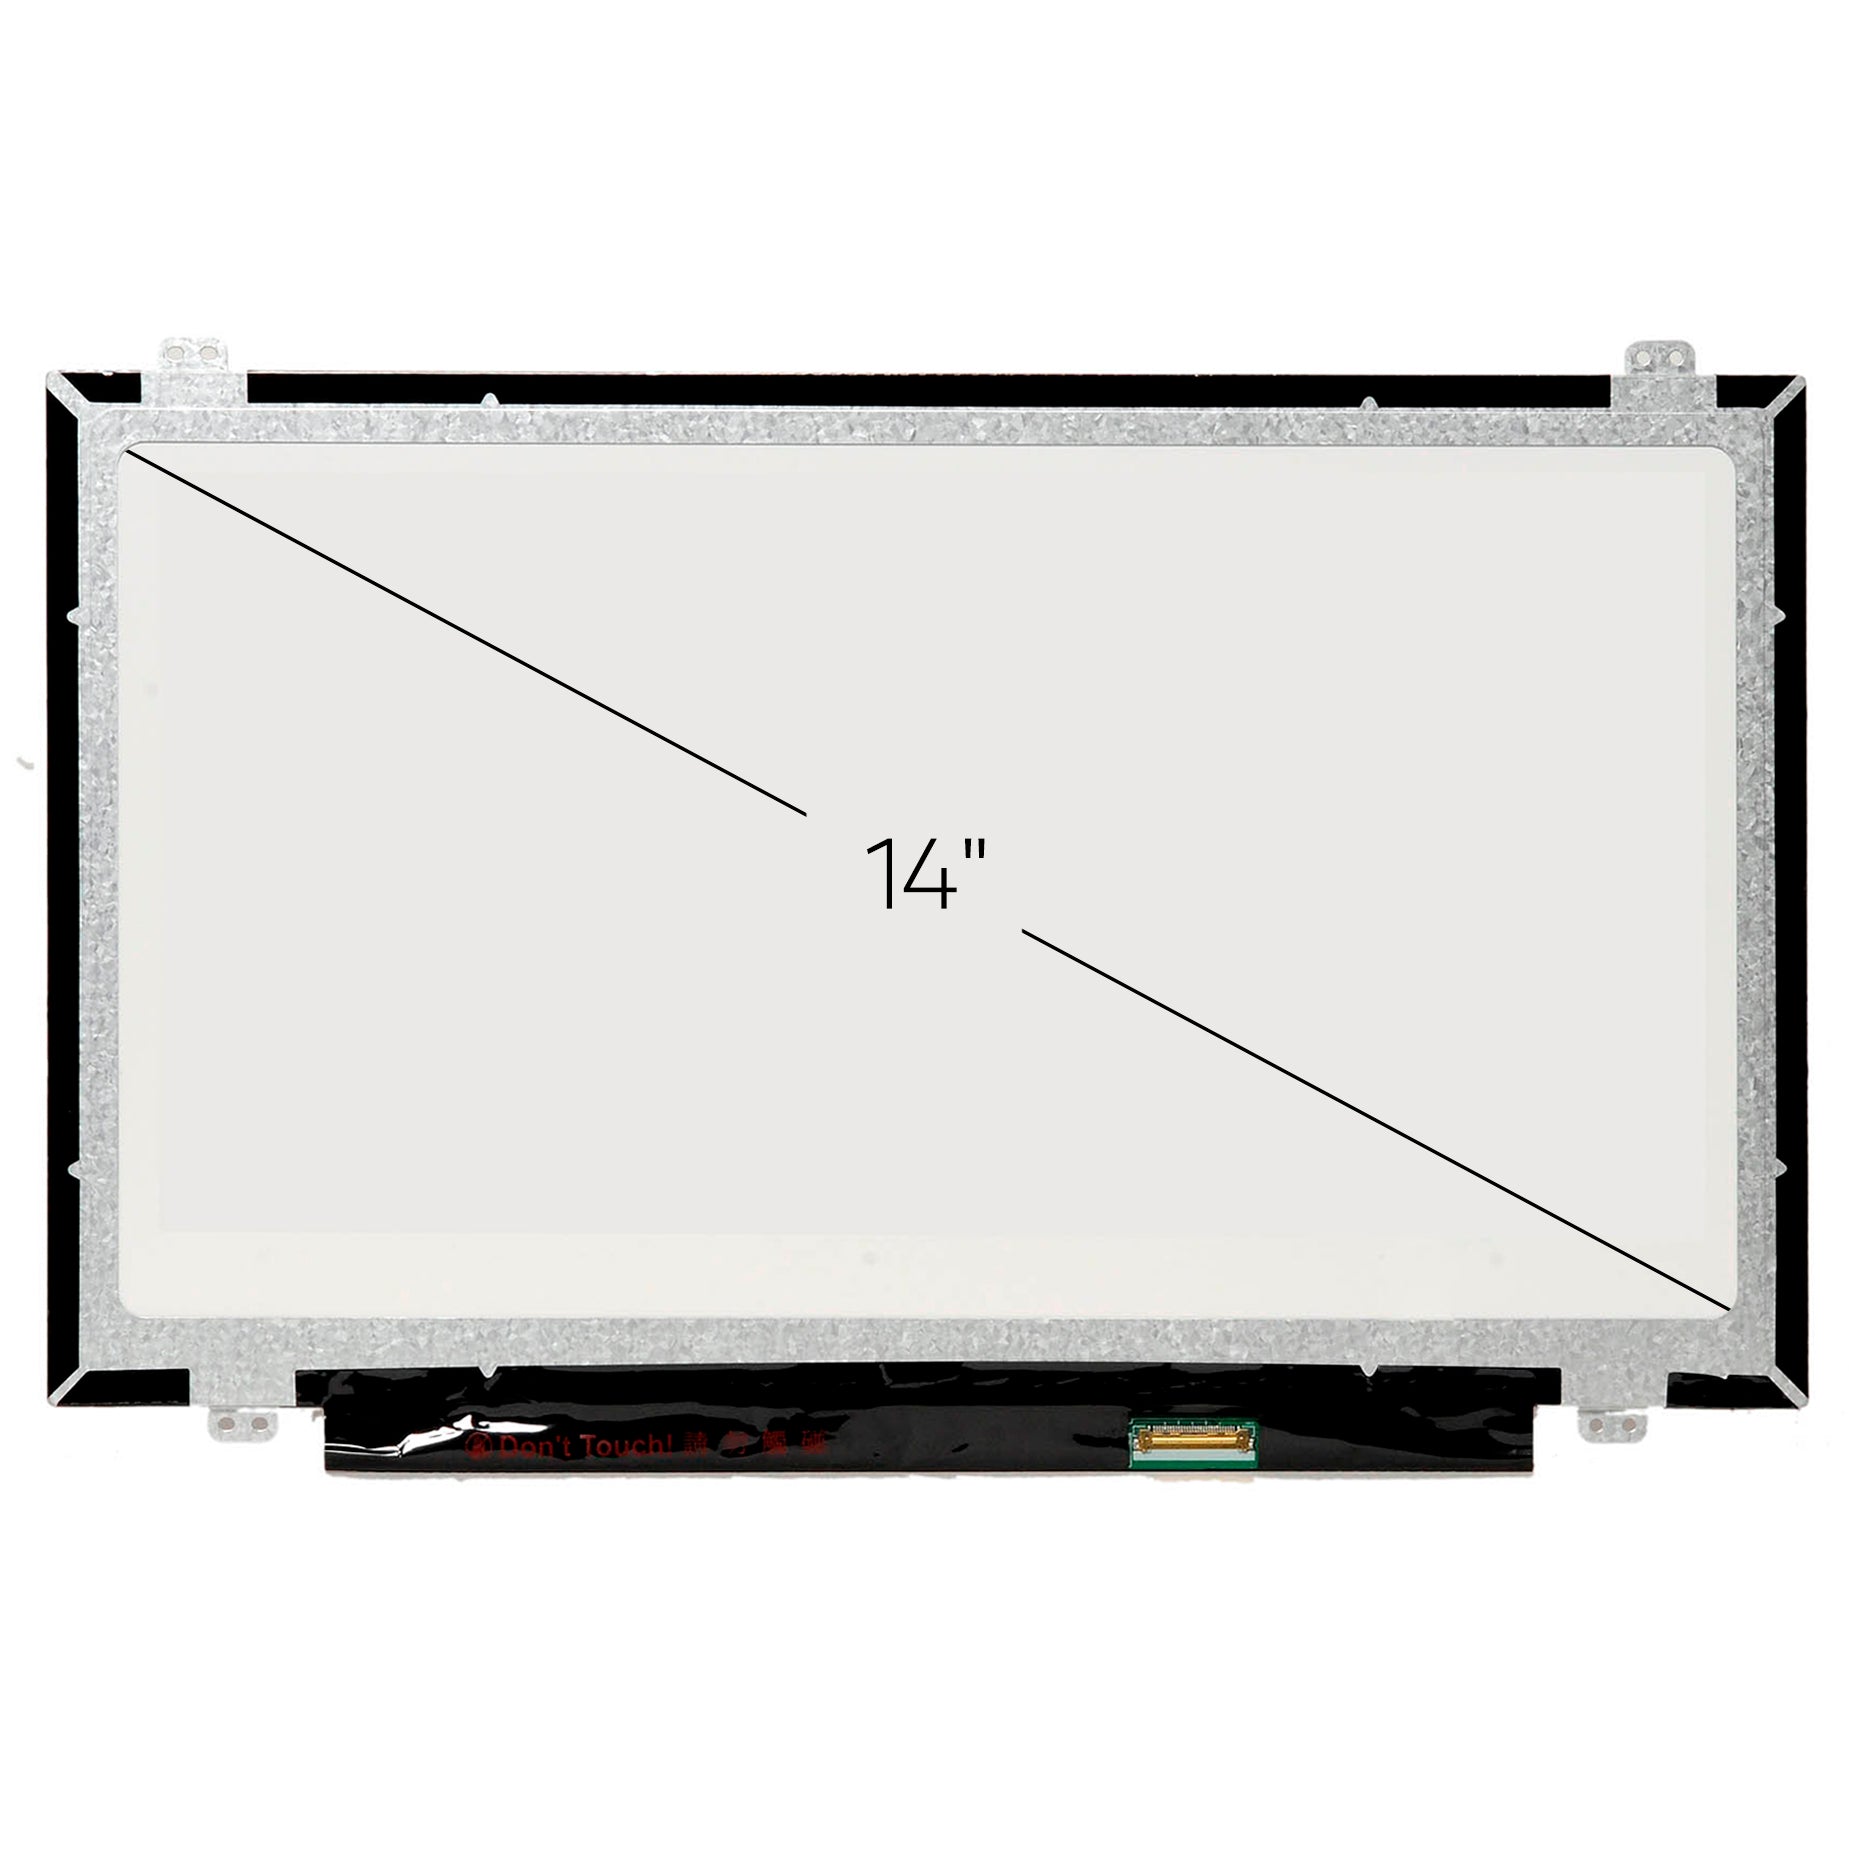 Screen Replacement for N140BGE-E54 HD 1366x768 Glossy LCD LED Display